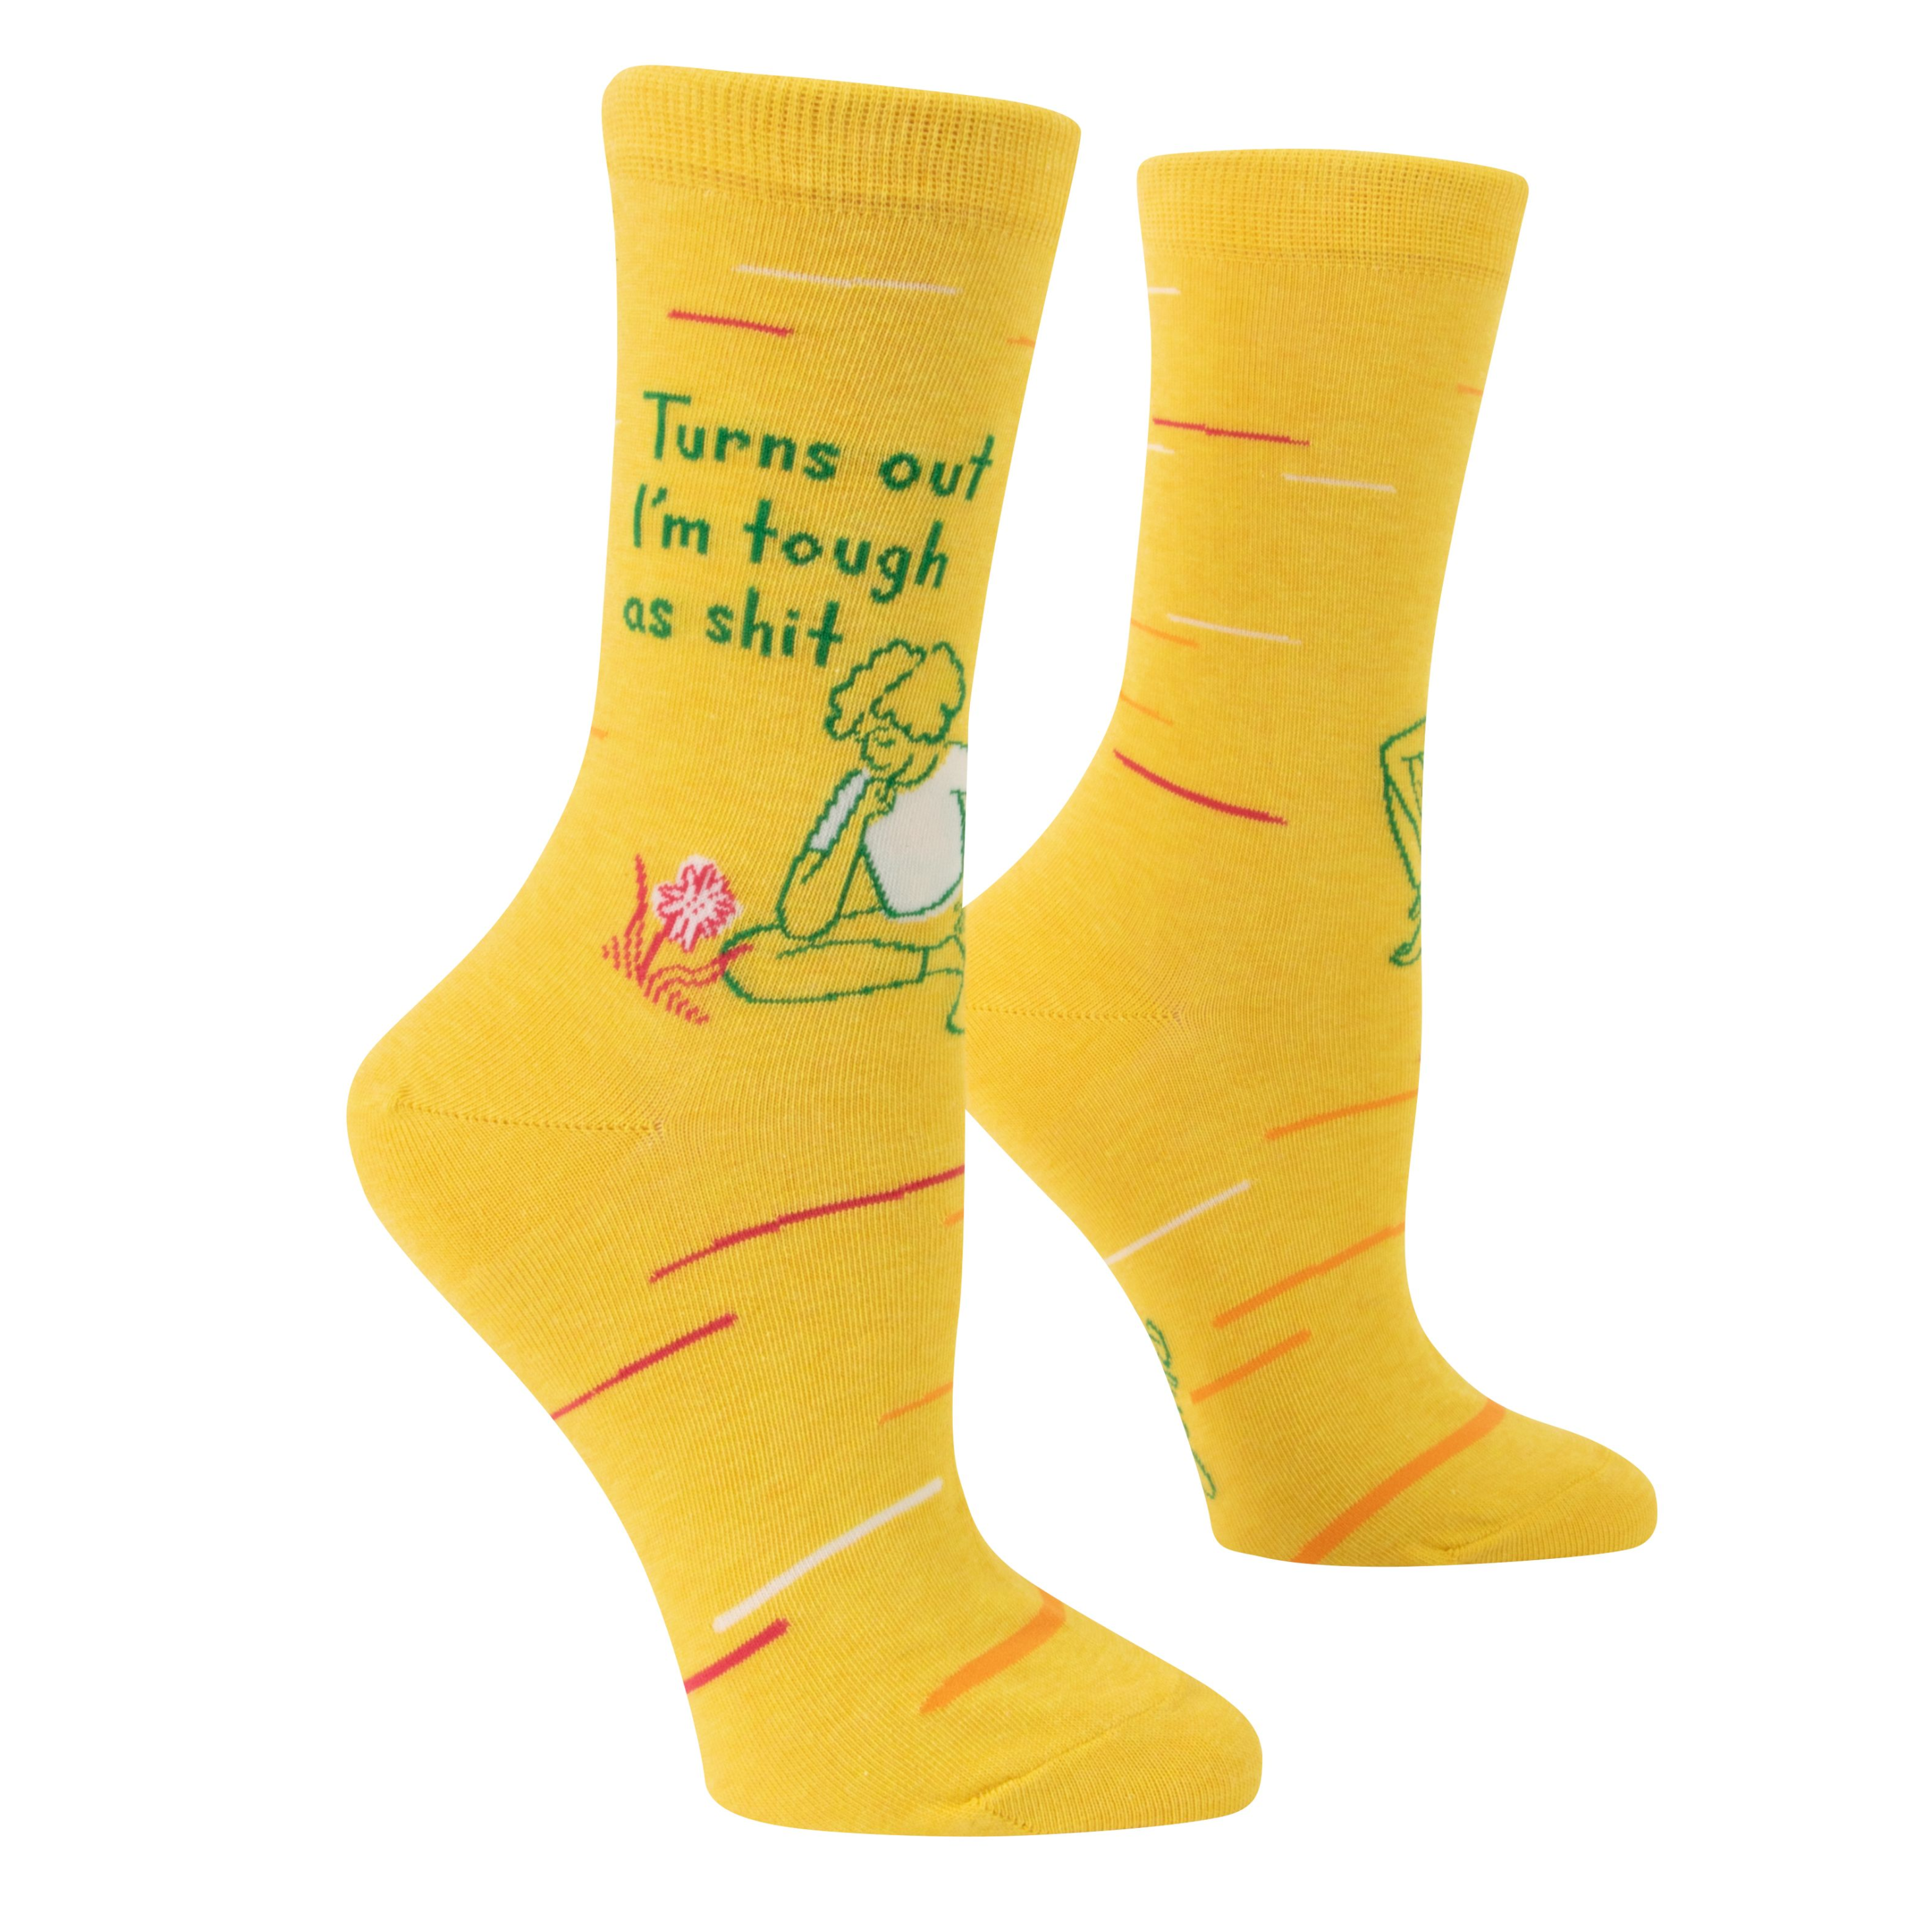 yellow socks with a picture of a person sitting beside a flower and above it says turns out i'm tough as shit